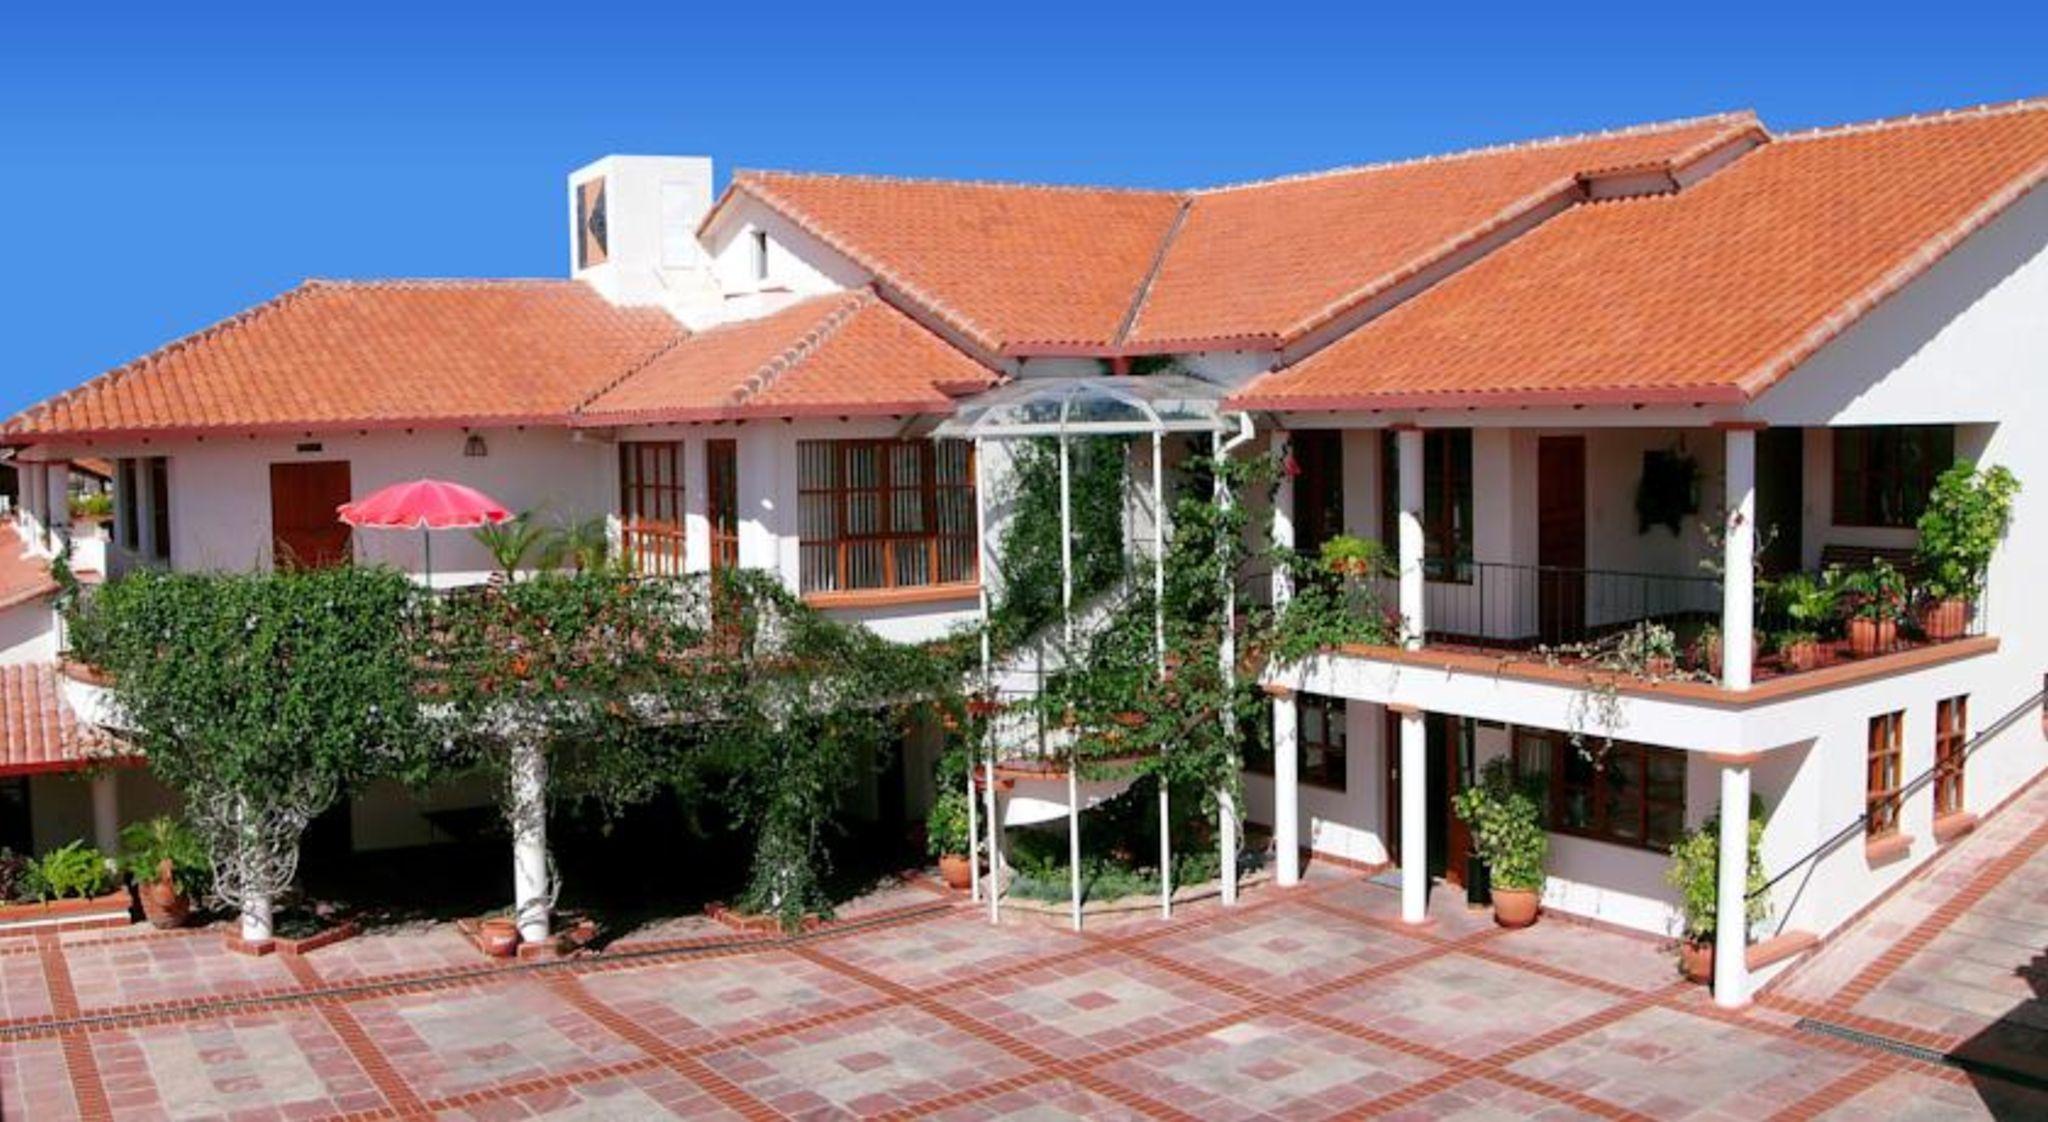 HOTEL CASAS KOLPING SUCRE 3* (Bolivia) - from US$ 71 | BOOKED